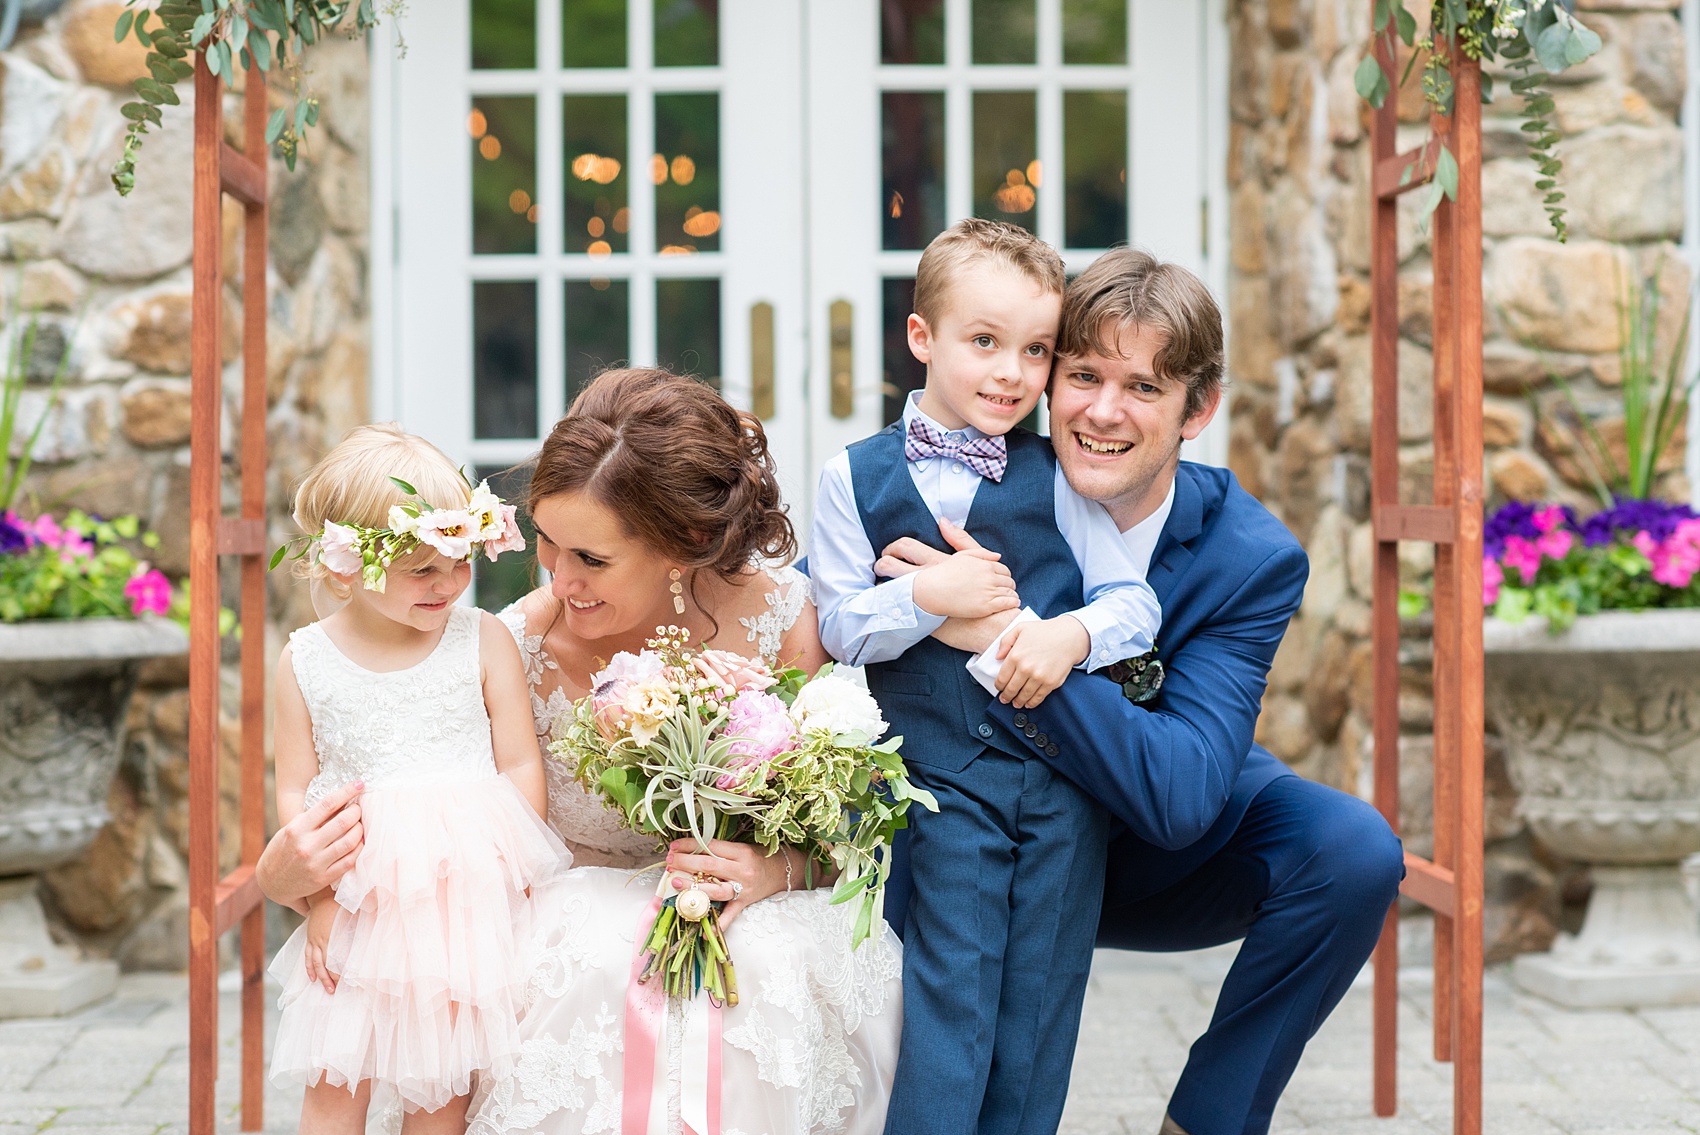 A summer wedding at Olde Mill Inn, NJ. Photos by Mikkel Paige Photography for an event with light pink and blue details. This New Jersey venue is a great option for something not too far from NYC. The couple had their ceremony in the interior courtyard and had an adorable flower girl and ring bearer. Click through for their complete wedding recap! #OldeMillInn #NJwedding #NJweddingphotographer #mikkelpaige #NewJerseyWeddingVenue #NewJerseyWedding #CrossEstateGardens 